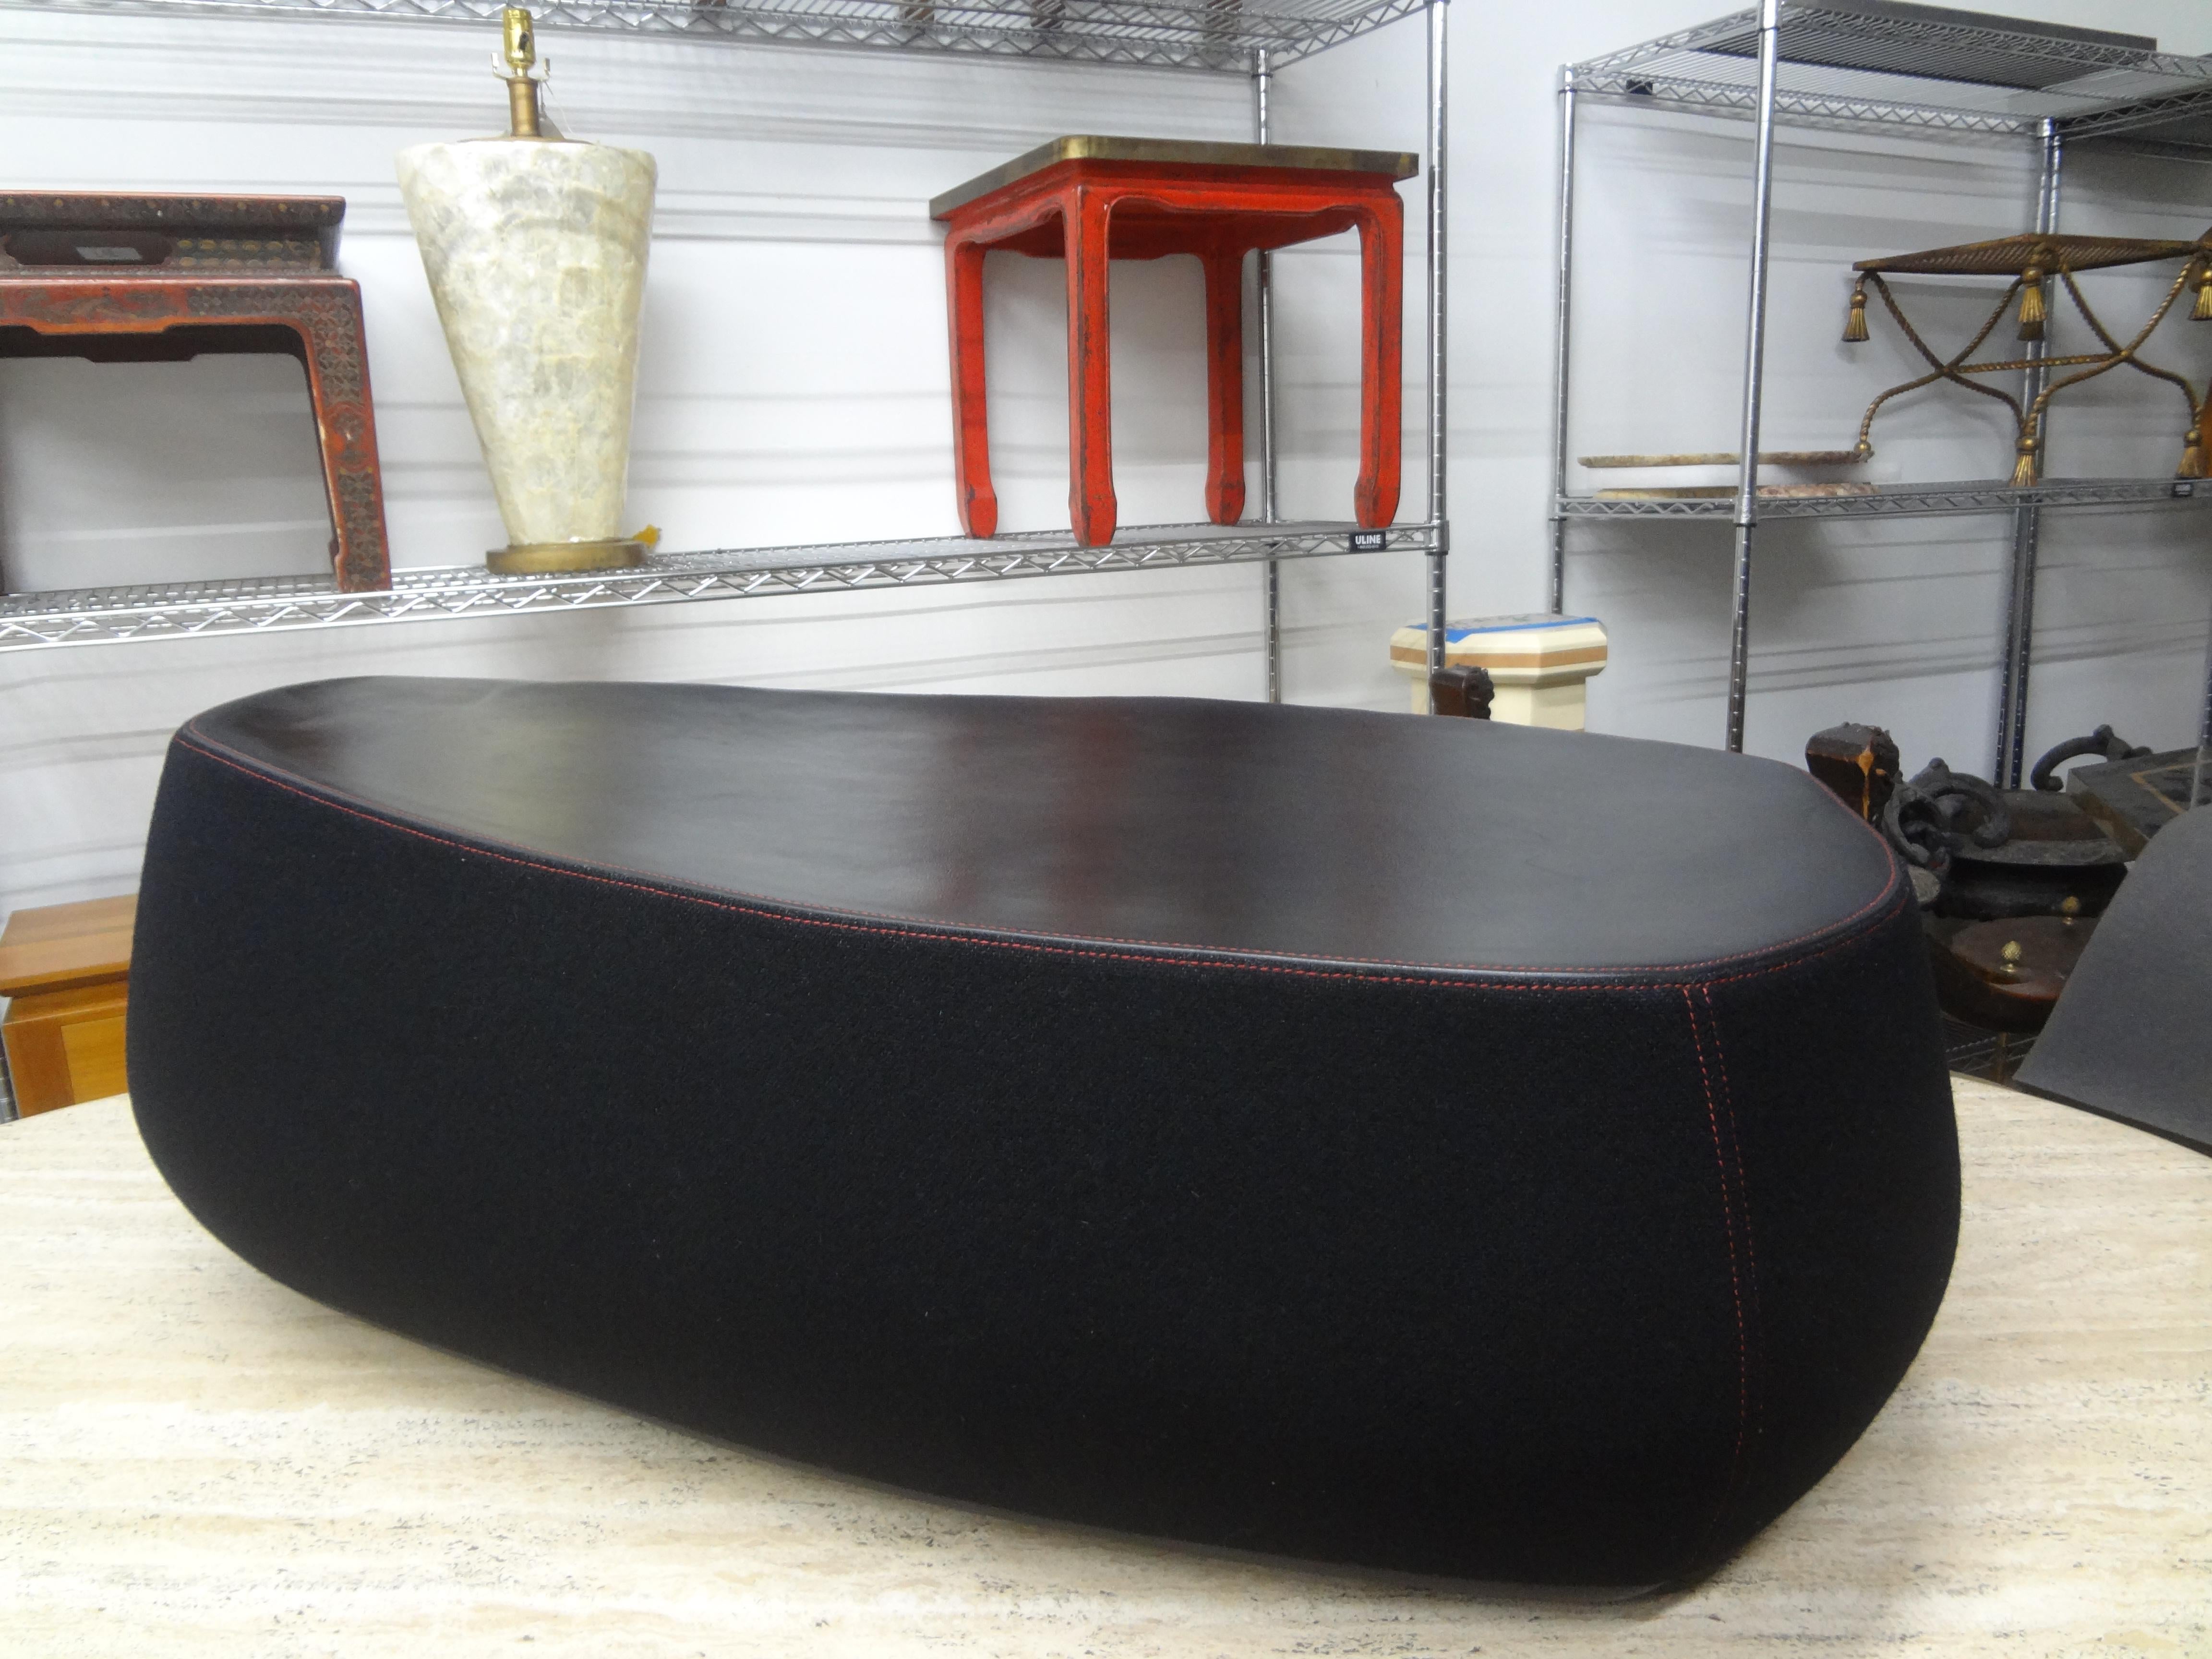 Italian Modern Sculptural Bench Or Pouf By Moroso.
This chic Italian sculptural bench retains the original black wool type fabric with red stitching and a leather top. Large enough to seat two and stunning floating in a room!